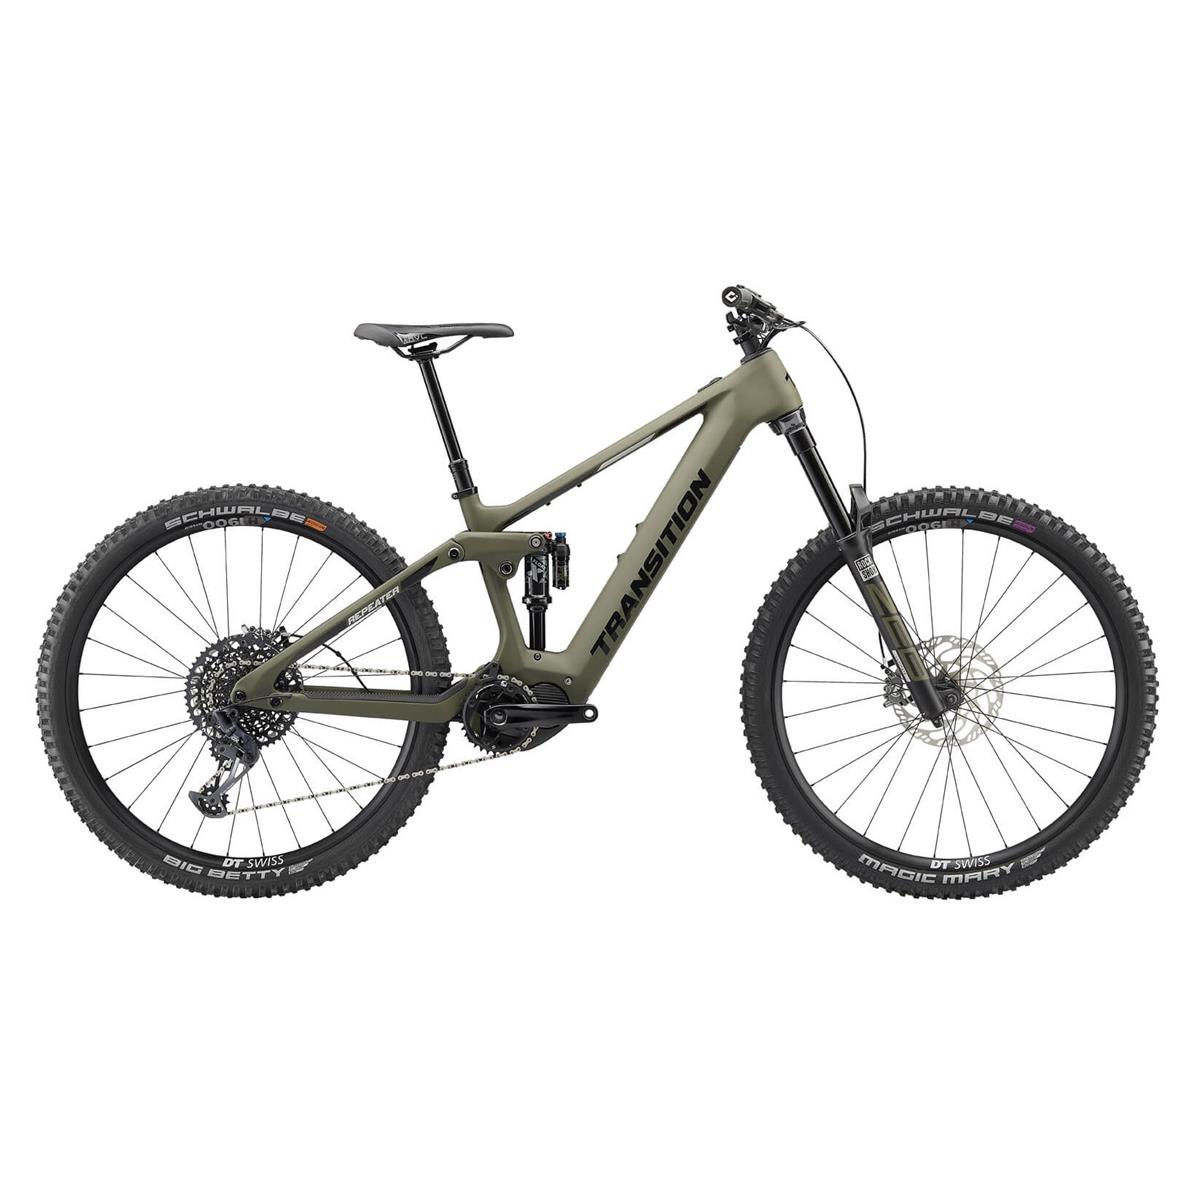 Repeater Carbon GX 29'' 160mm 12v 630Wh Shimano EP8 Mossy Green Taglia S